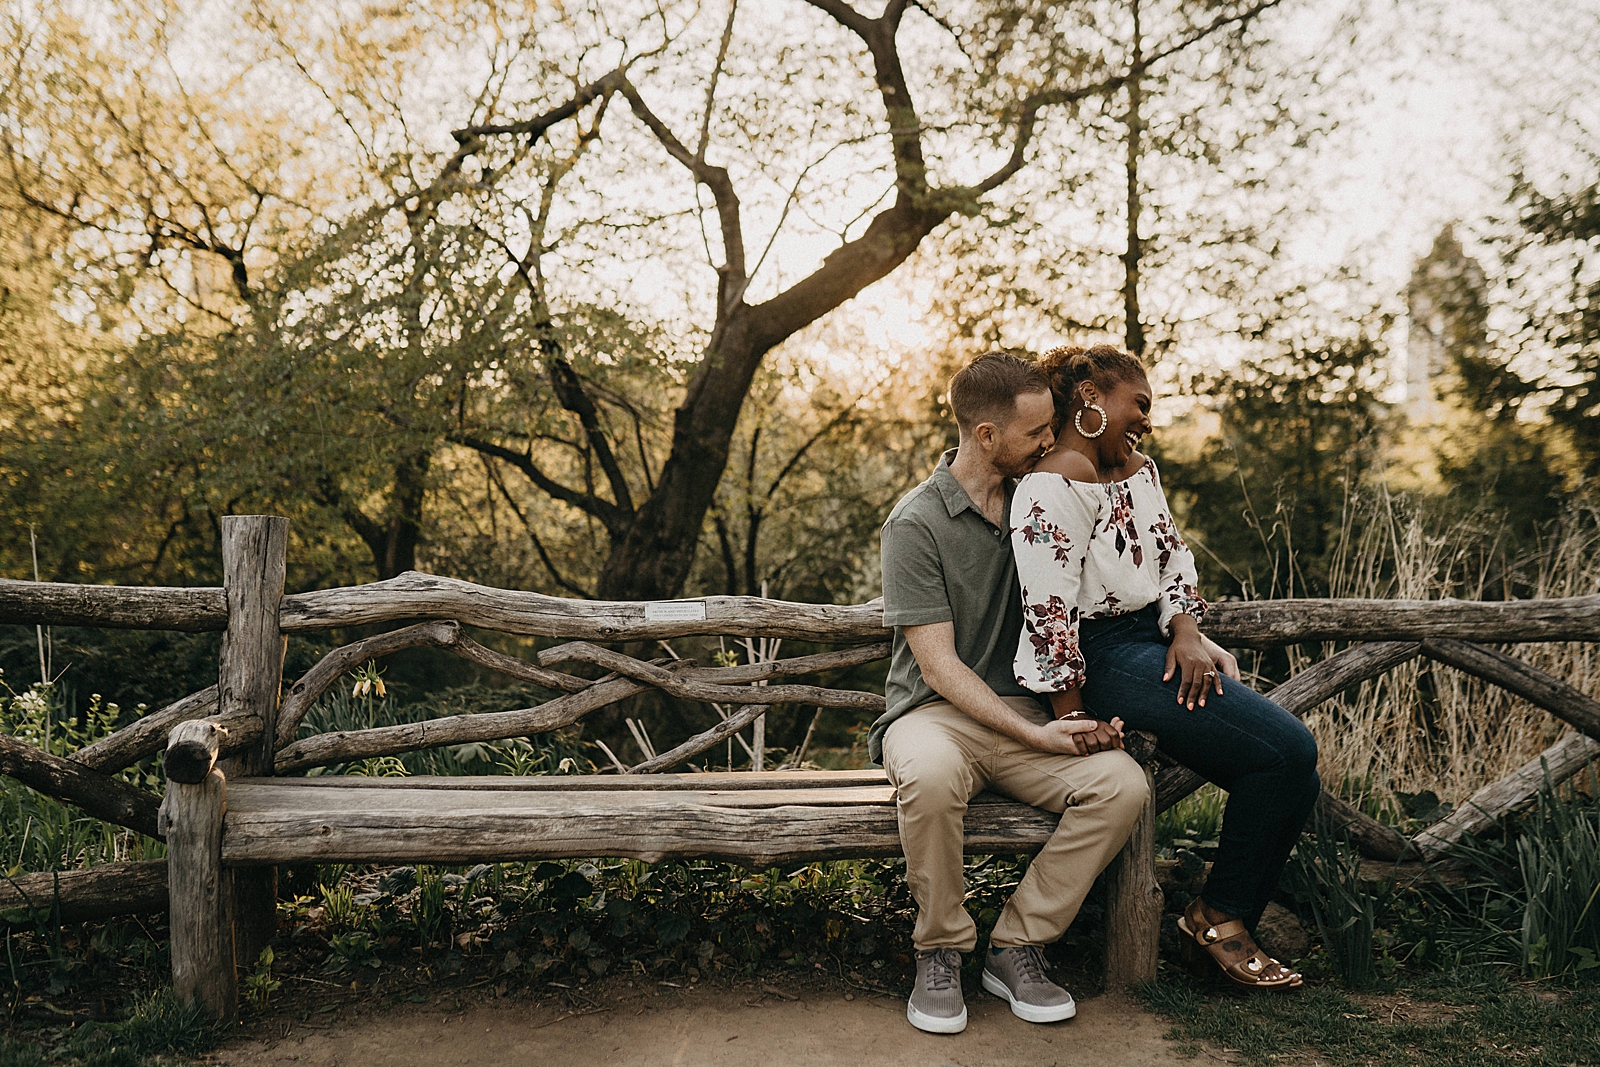 Woman sitting on man's lap on and and man nuzzling on shoulder of woman wooden bench